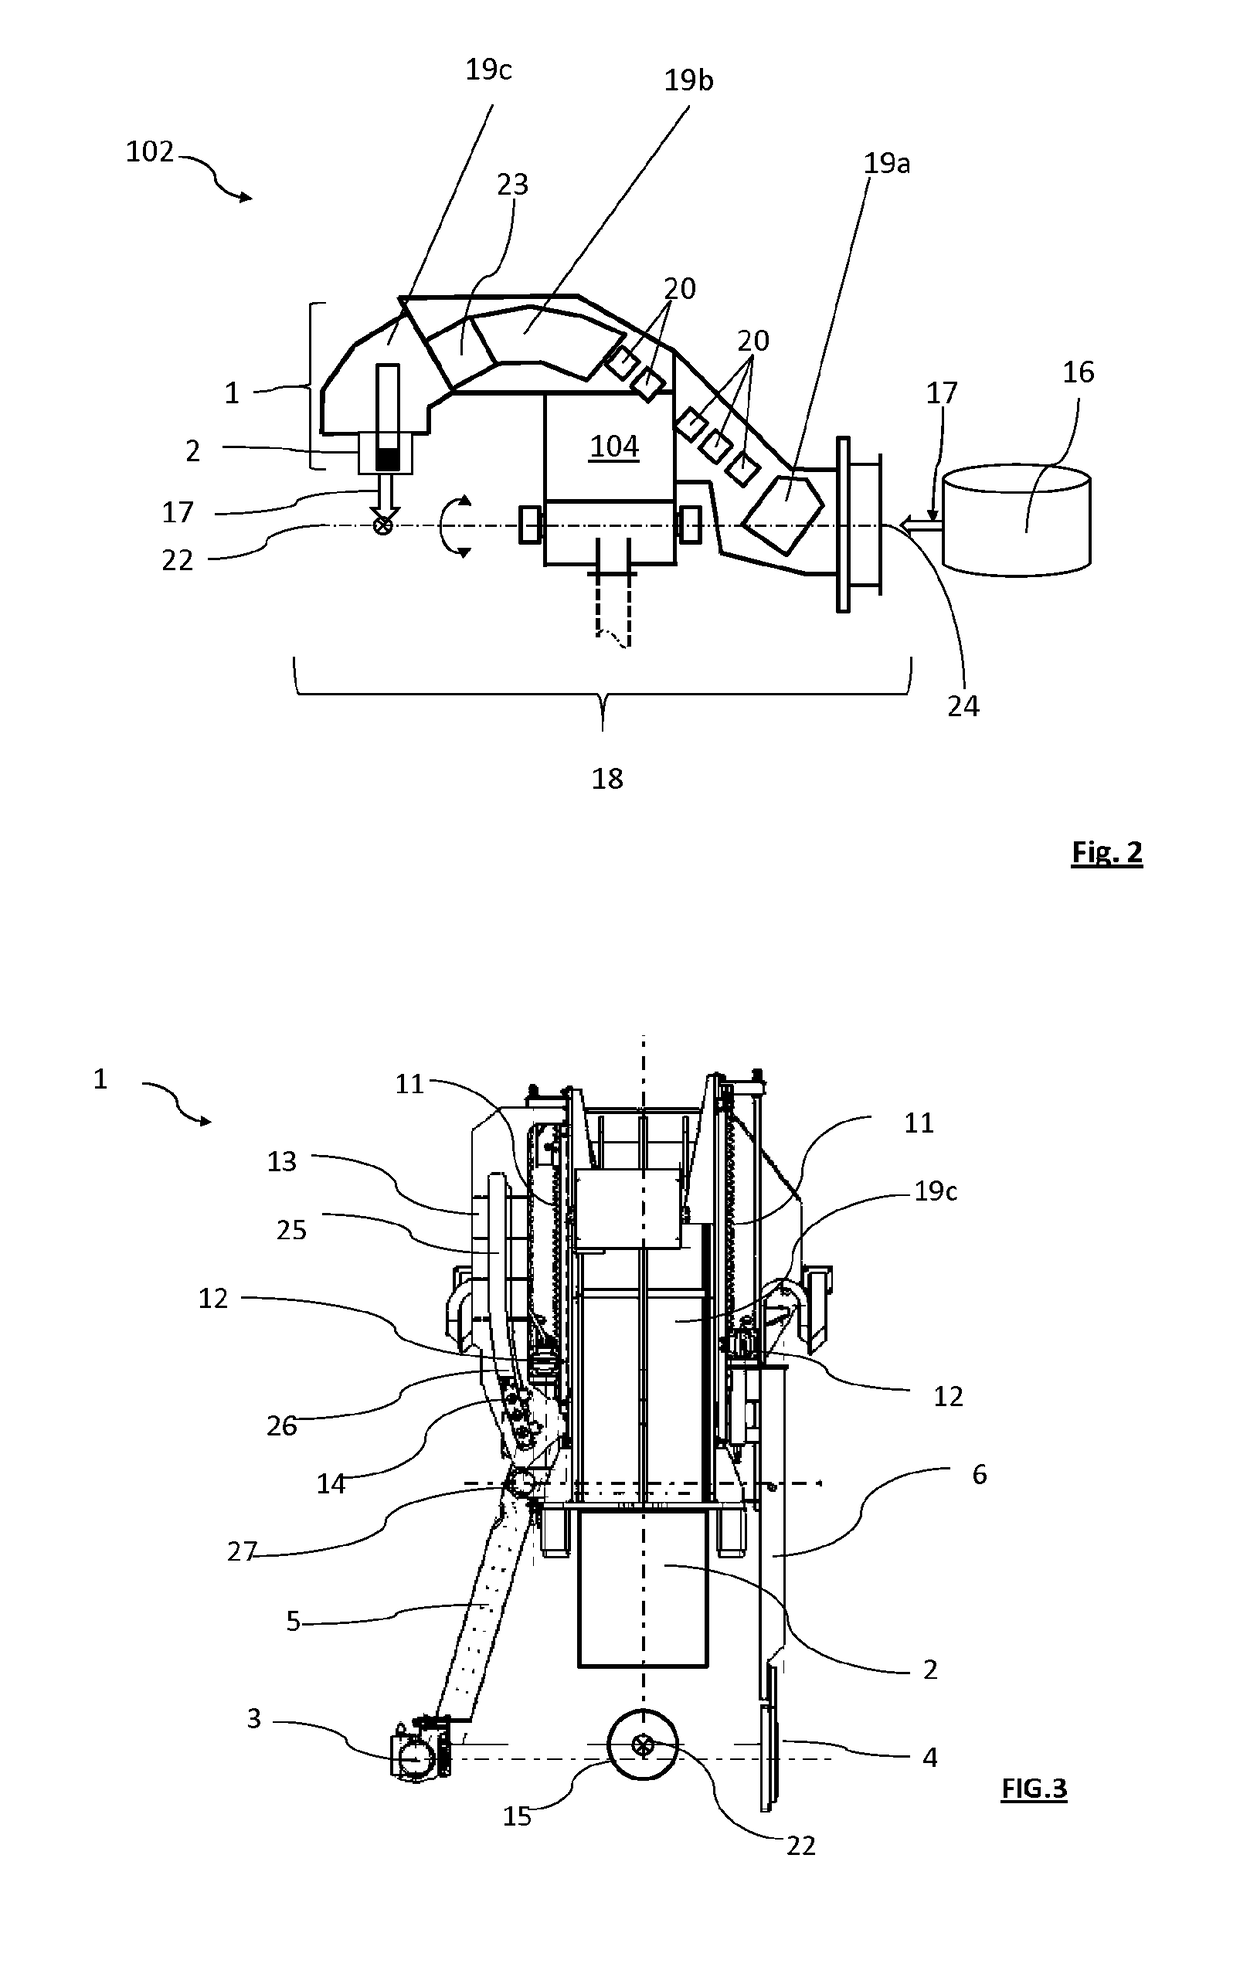 Hadron therapy installation comprising an imaging device